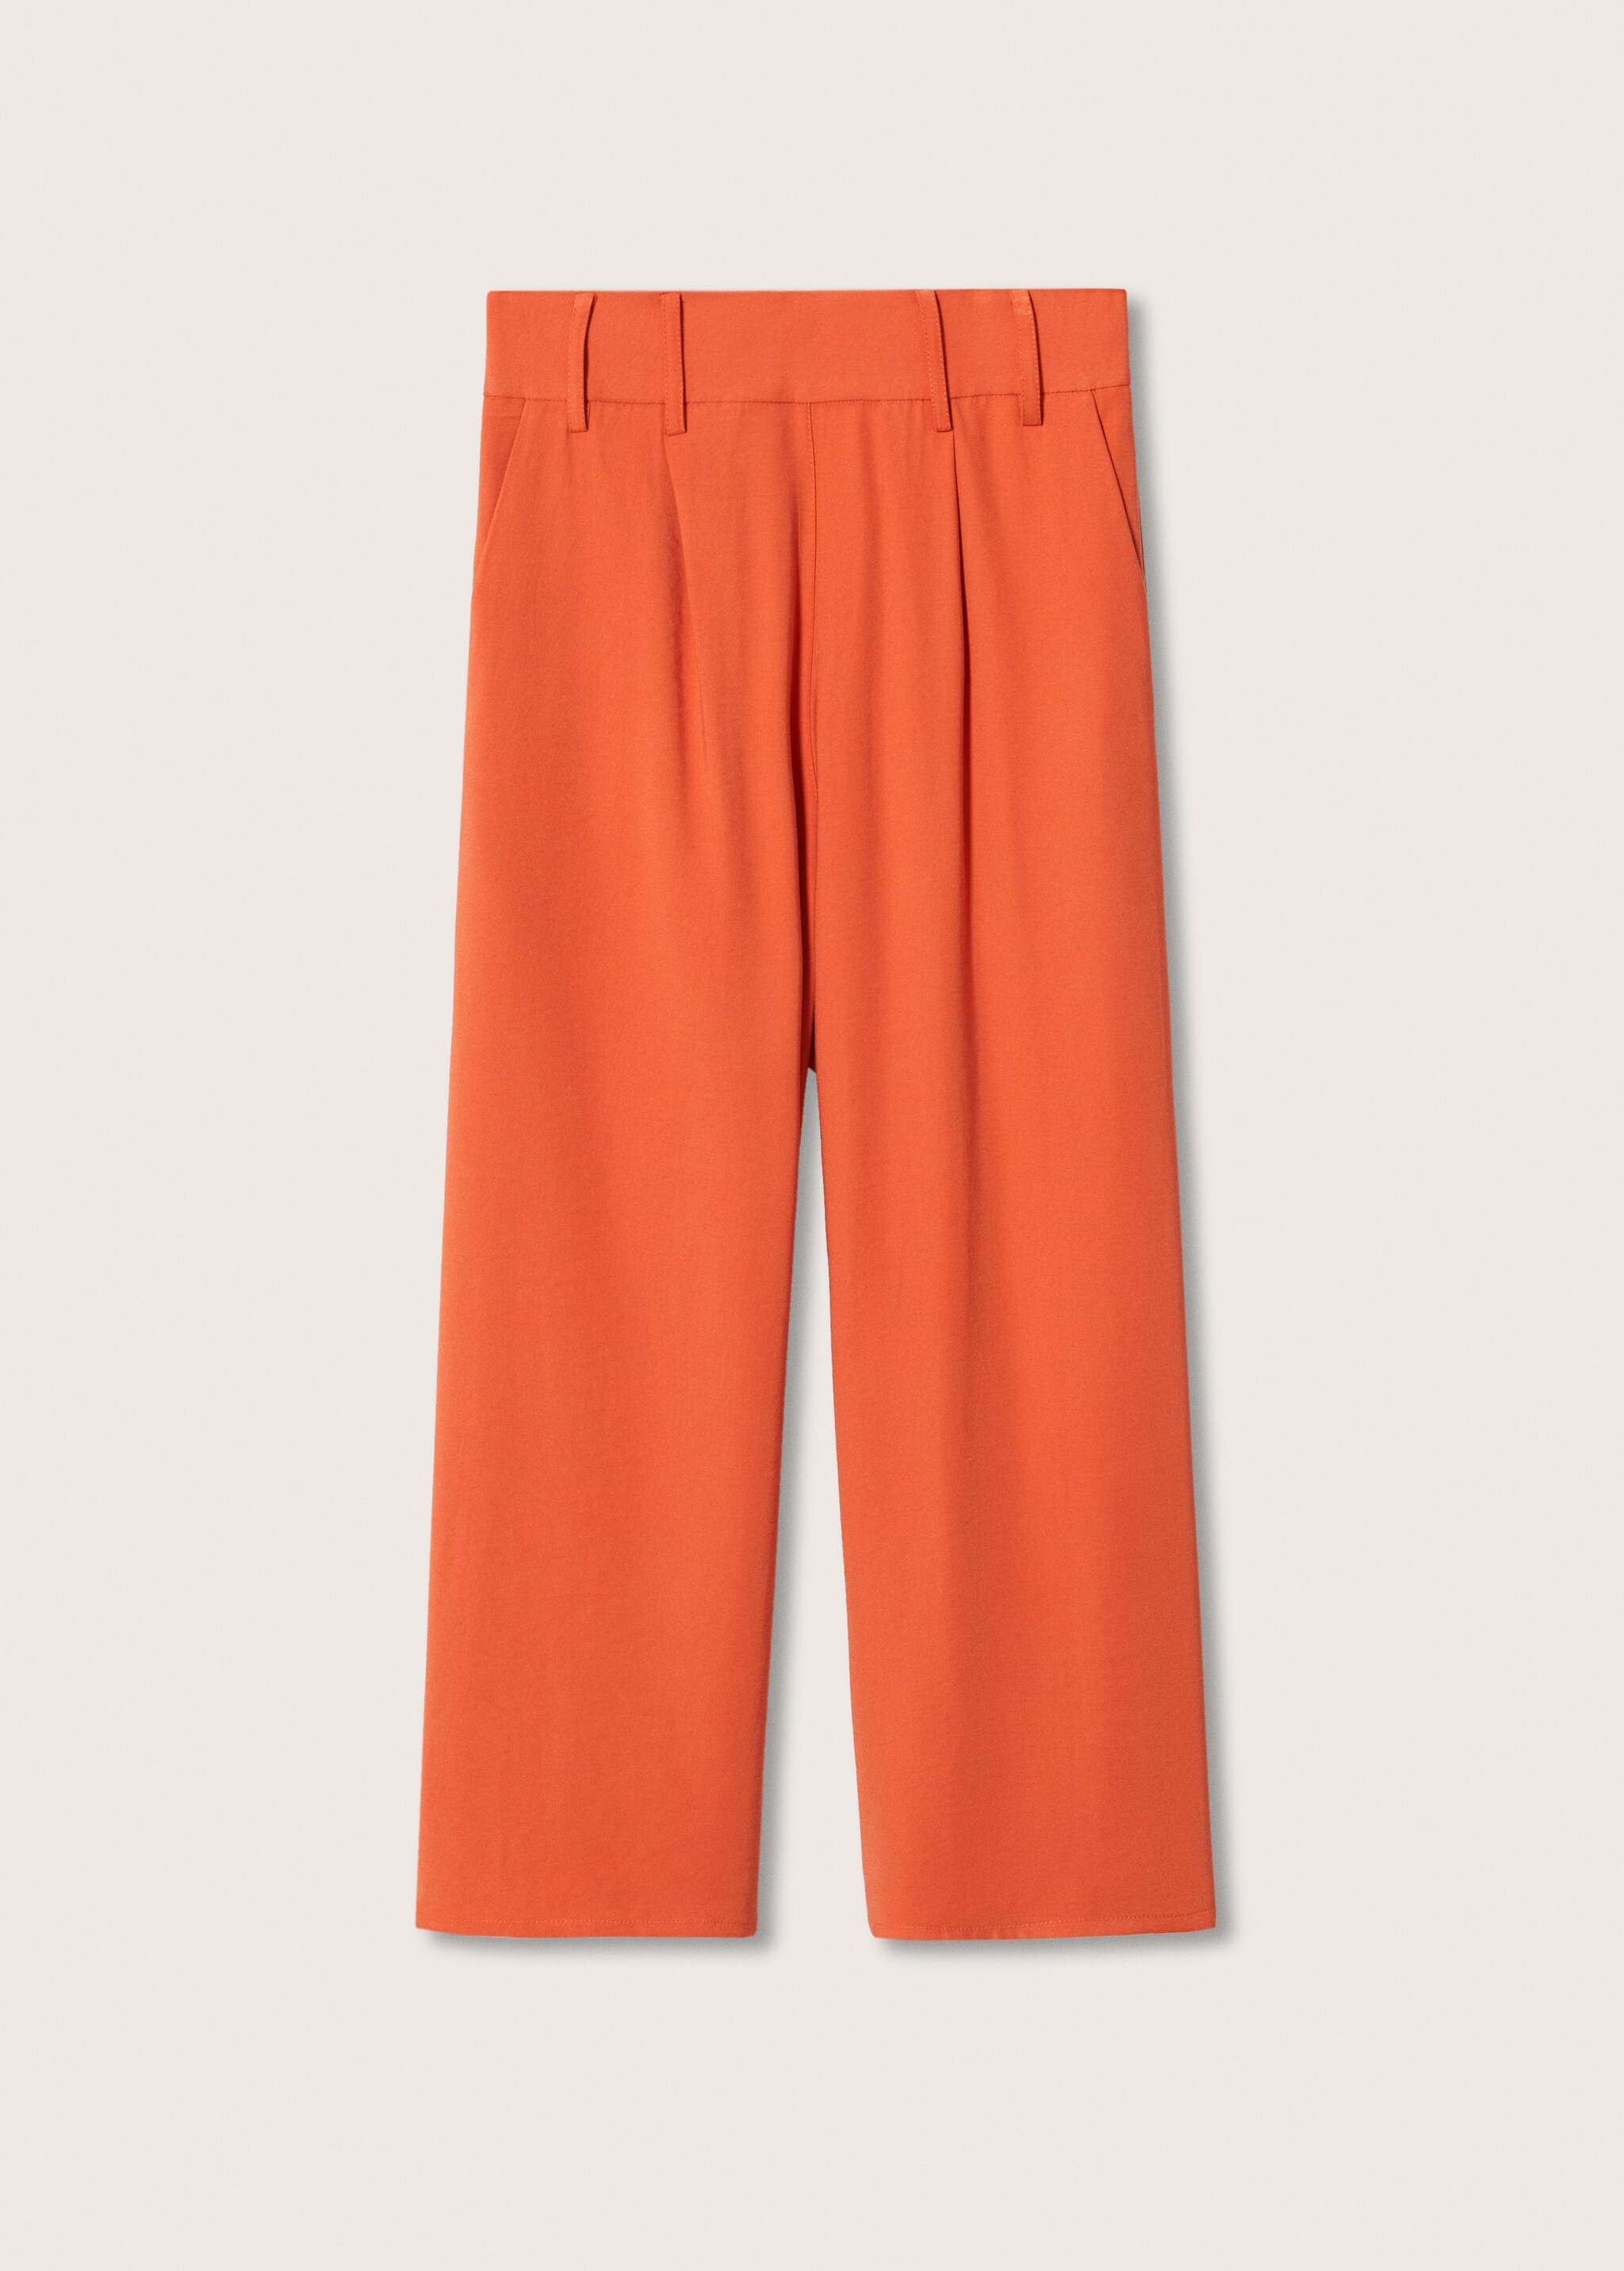  Fluid culotte trouser - Article without model